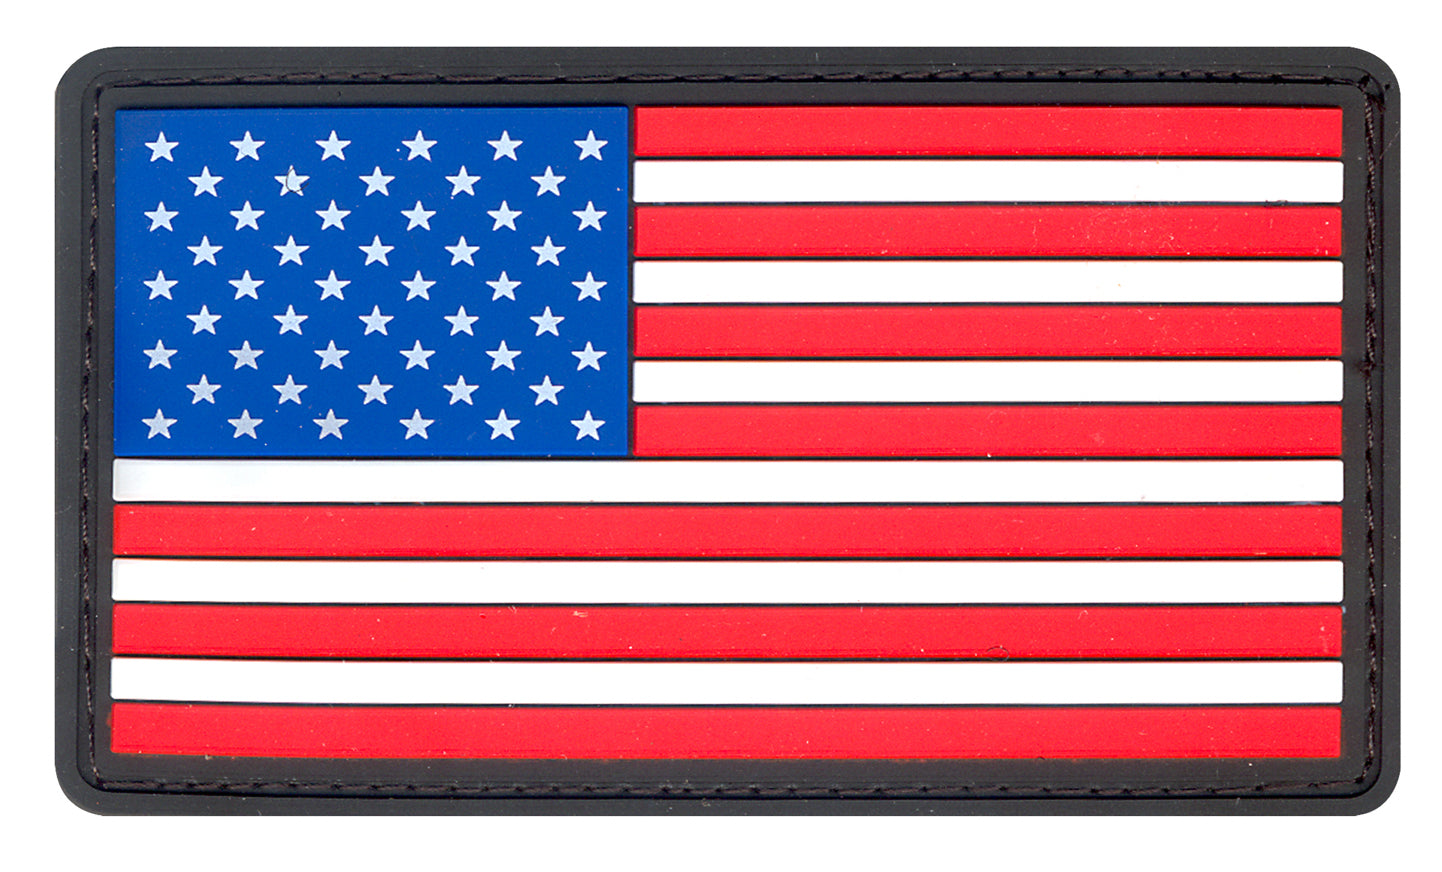 PVC US Flag Patch With Hook Back